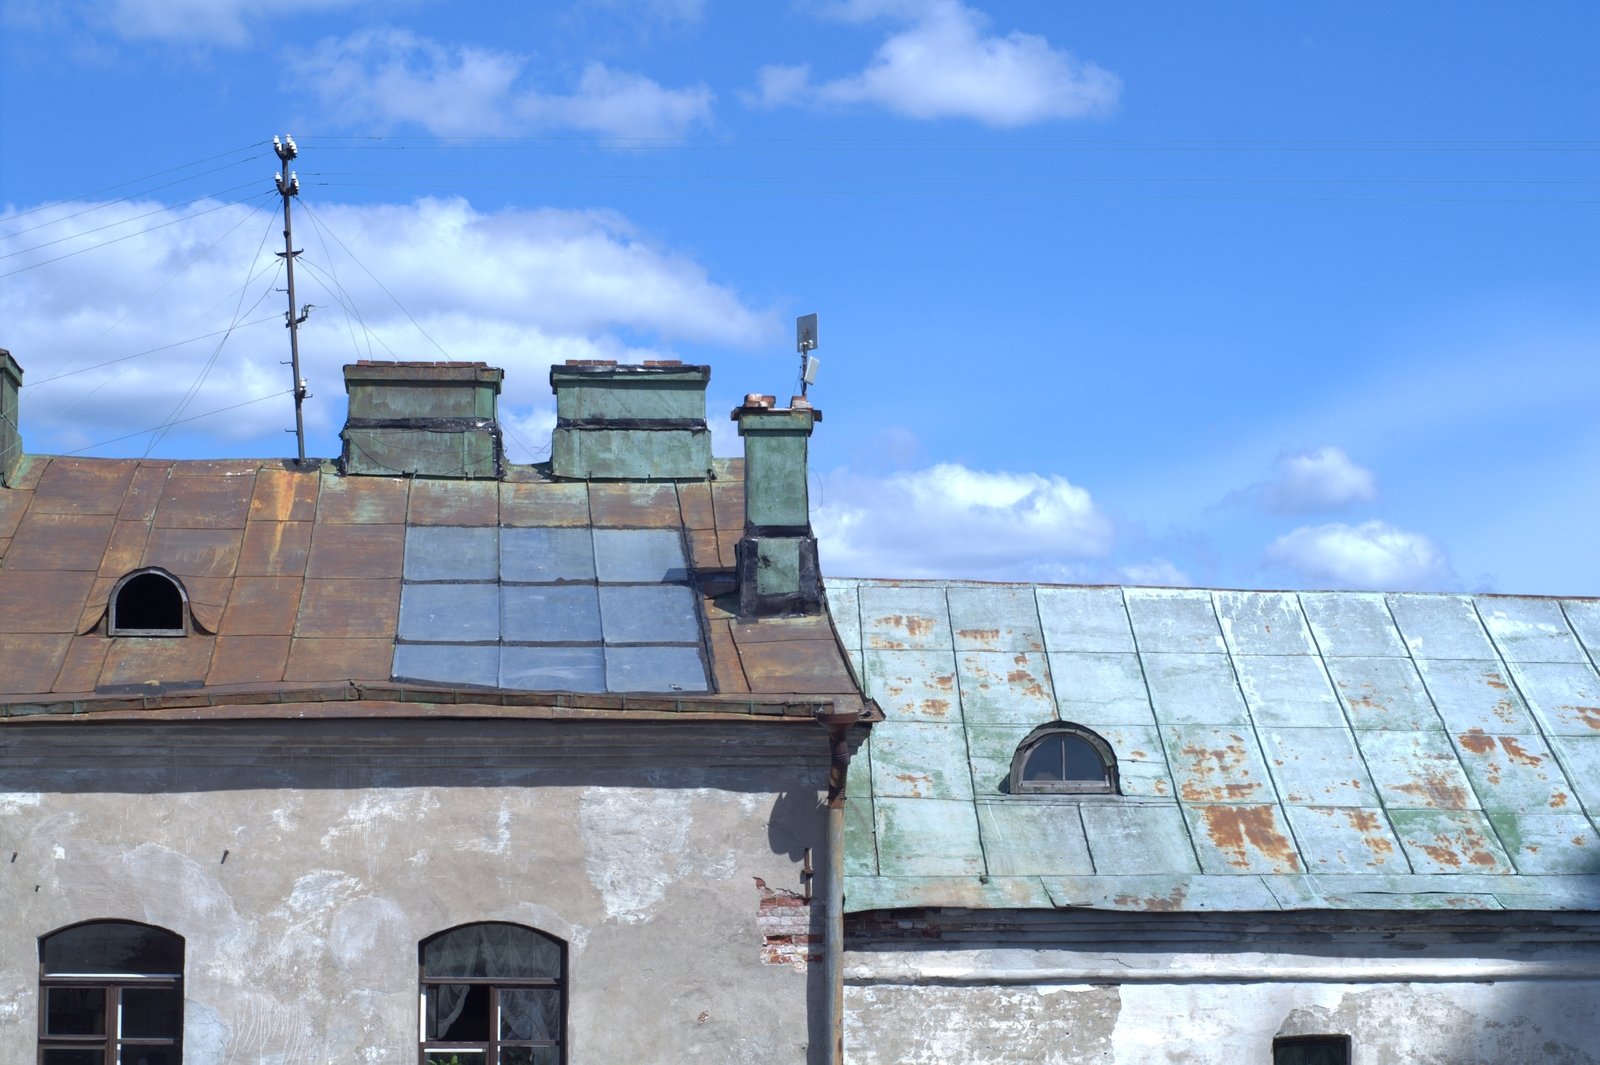 a couple of roof with two chimneys and a building with an old blue tin - tiled facade